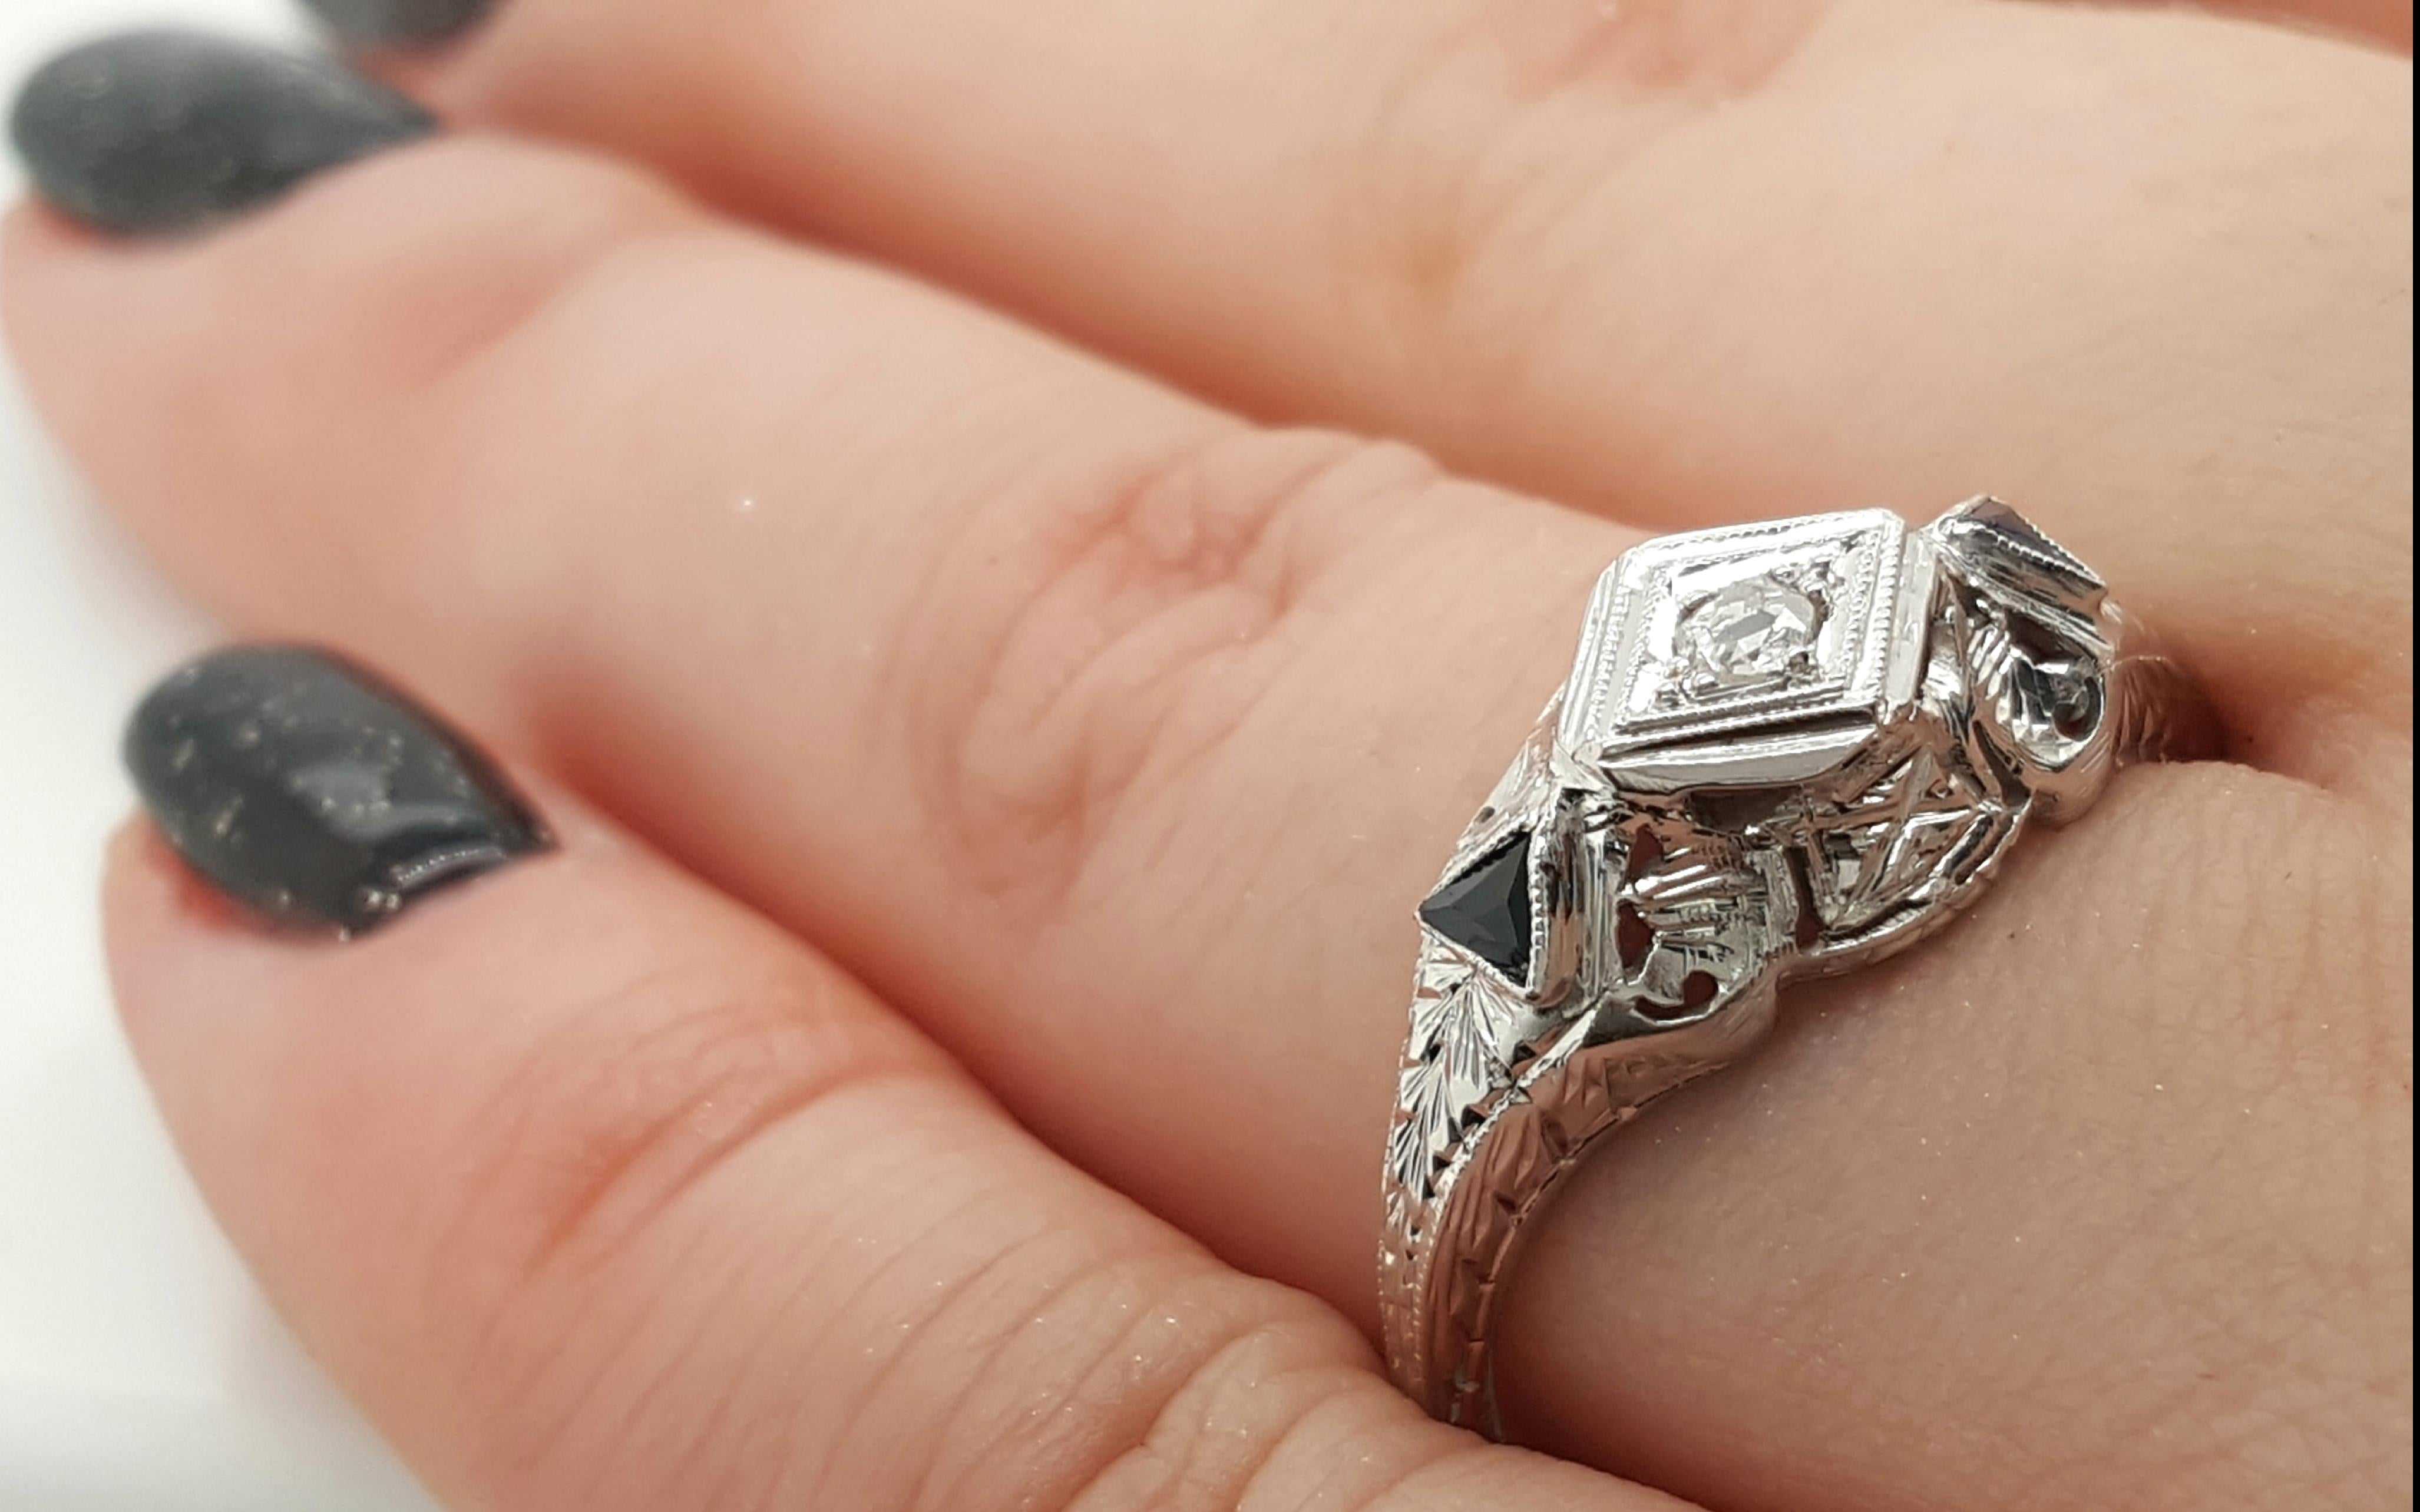 This lovely example of an Art Deco ring is crafted of stunning 18K white gold. Intricate filigree designs surround one center diamond on this vintage beauty. Two sapphire pyramids add a pop of color that adds to this already beautiful piece. This is